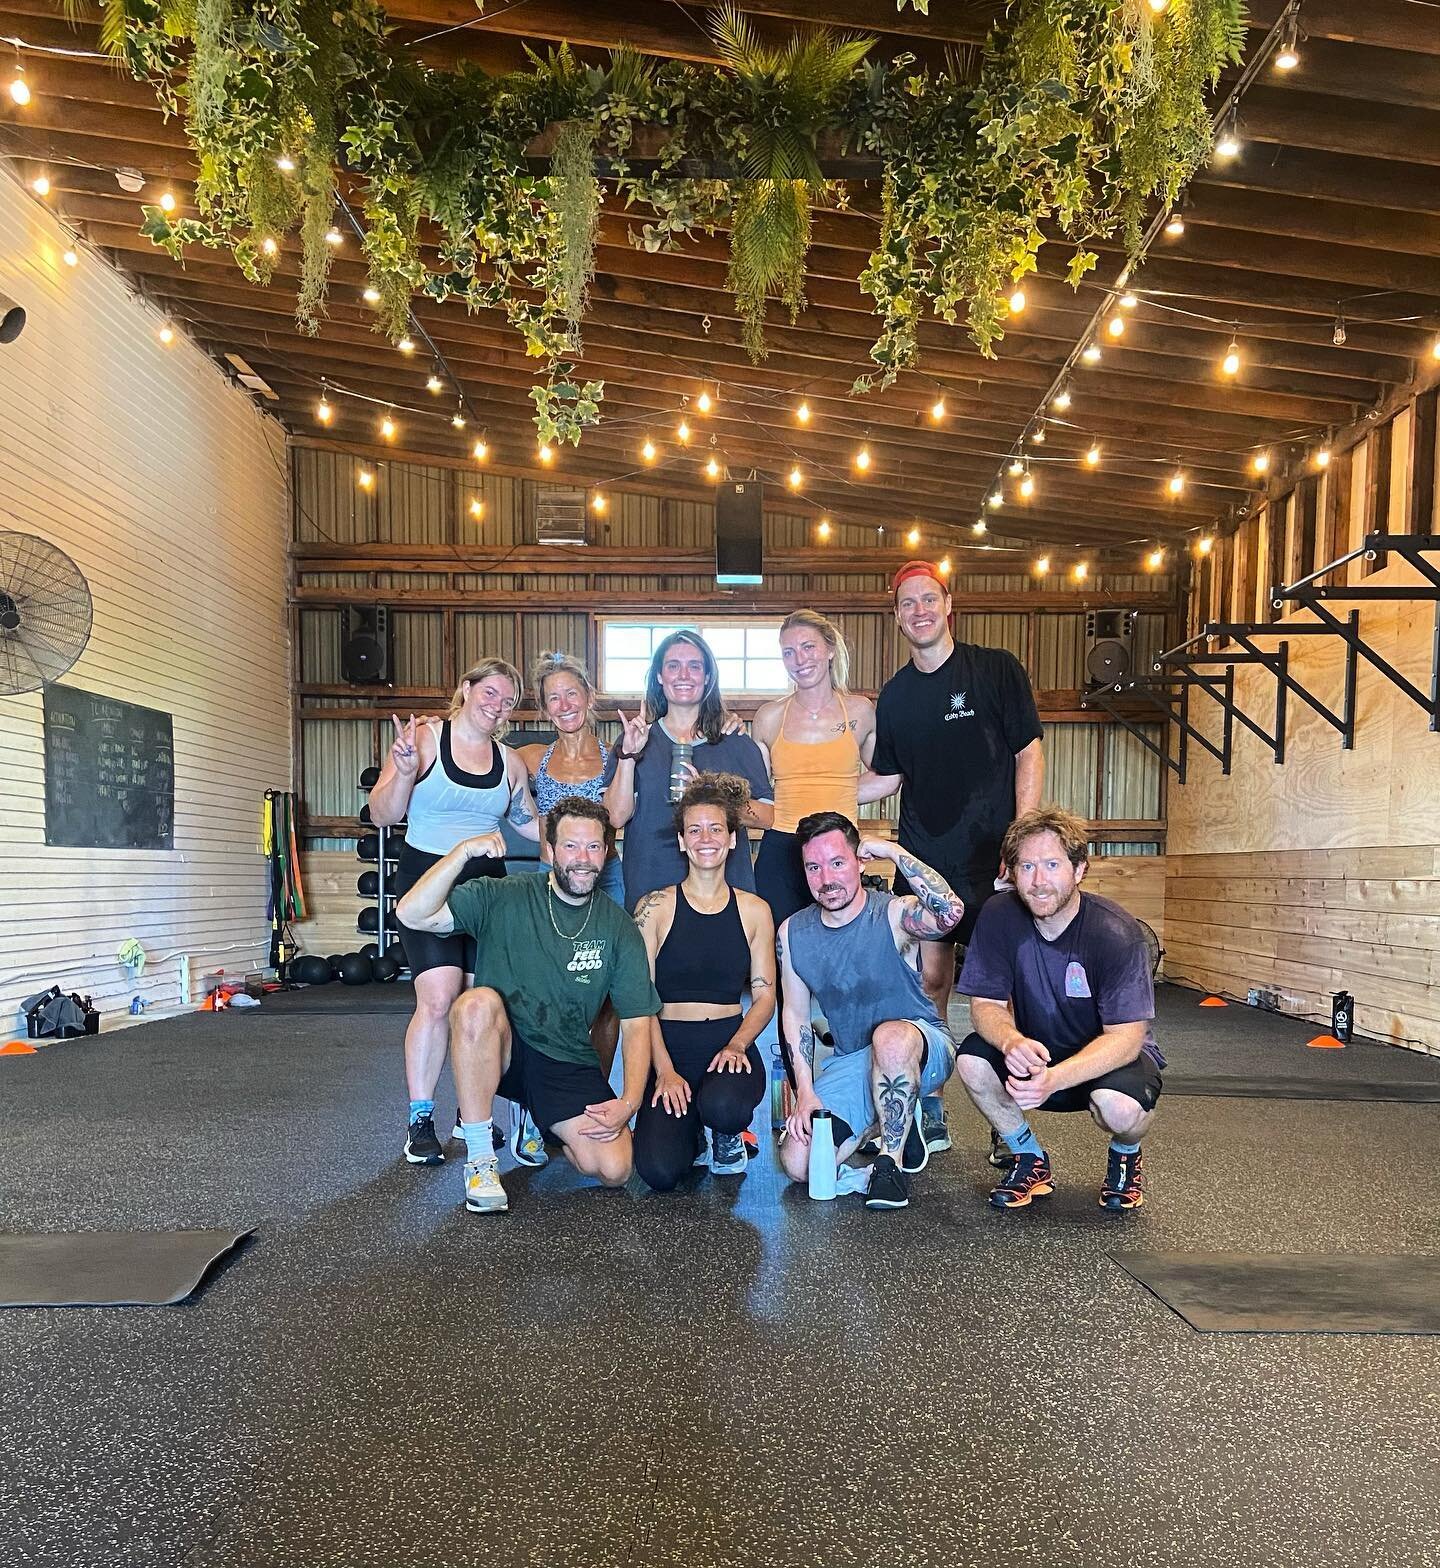 TIGHT CLUB REUNION!

This morning @keightythousand @rachelle.bonneville &amp; @syl_ozbalt_pgm came storming into the studio for a high energy fun filled class.

For those that don&rsquo;t know, without @tightclub Keighty and the gang. FG would not be